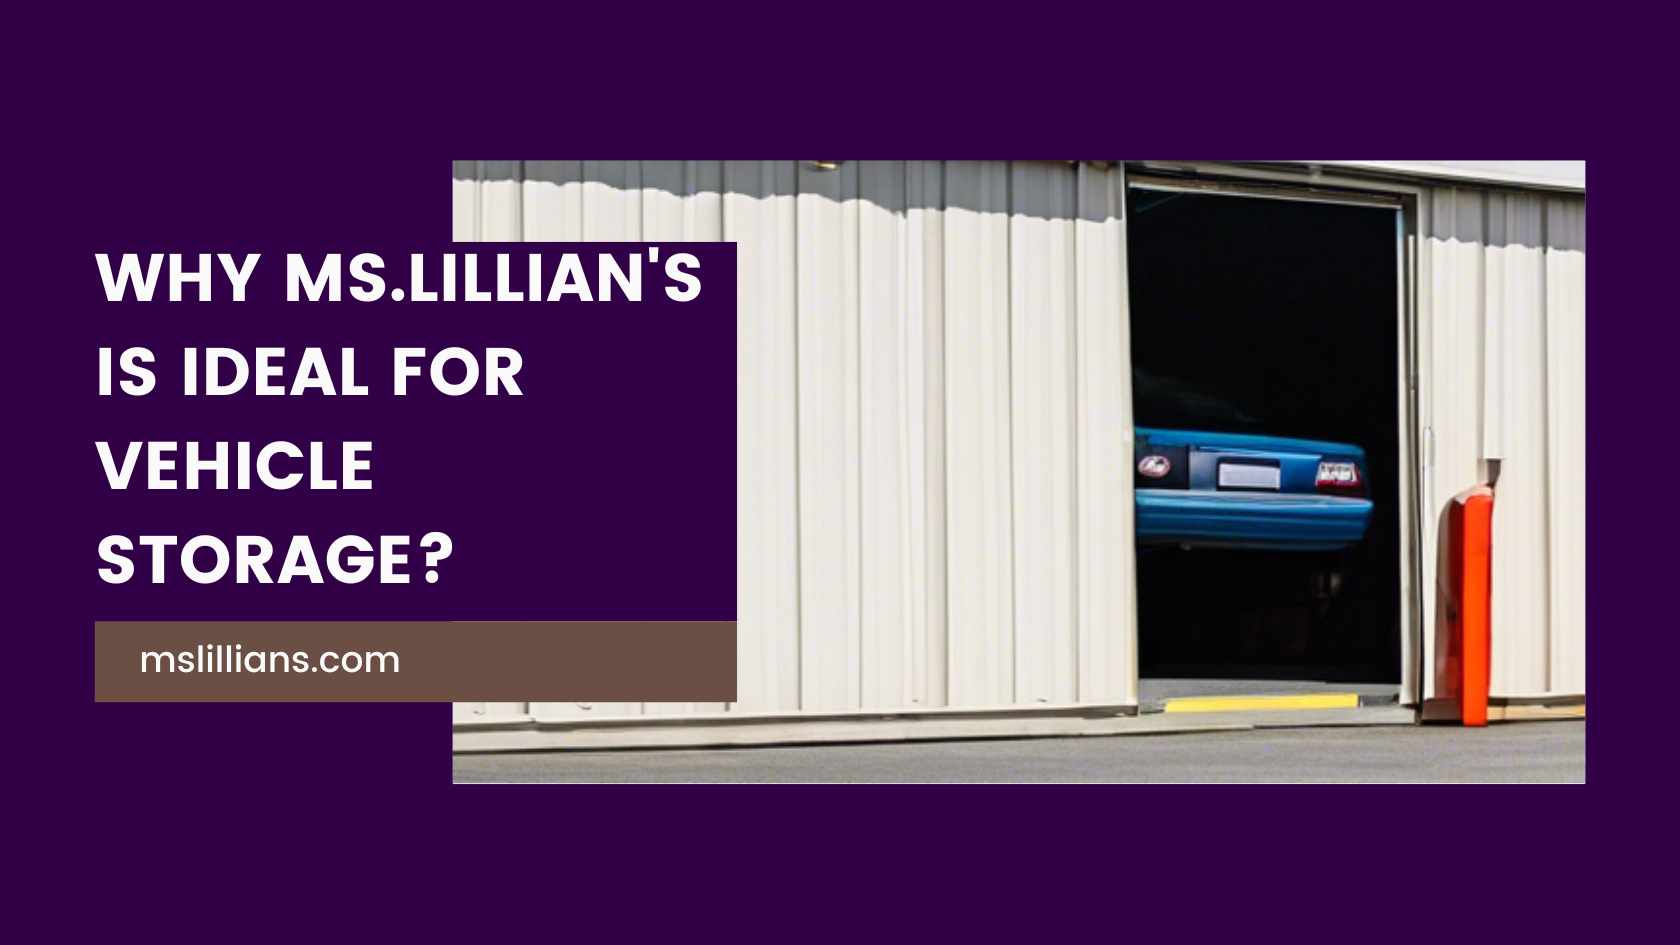 Why Ms.Lillian's is Ideal for Vehicle Storage? - Vehicle storage units near me